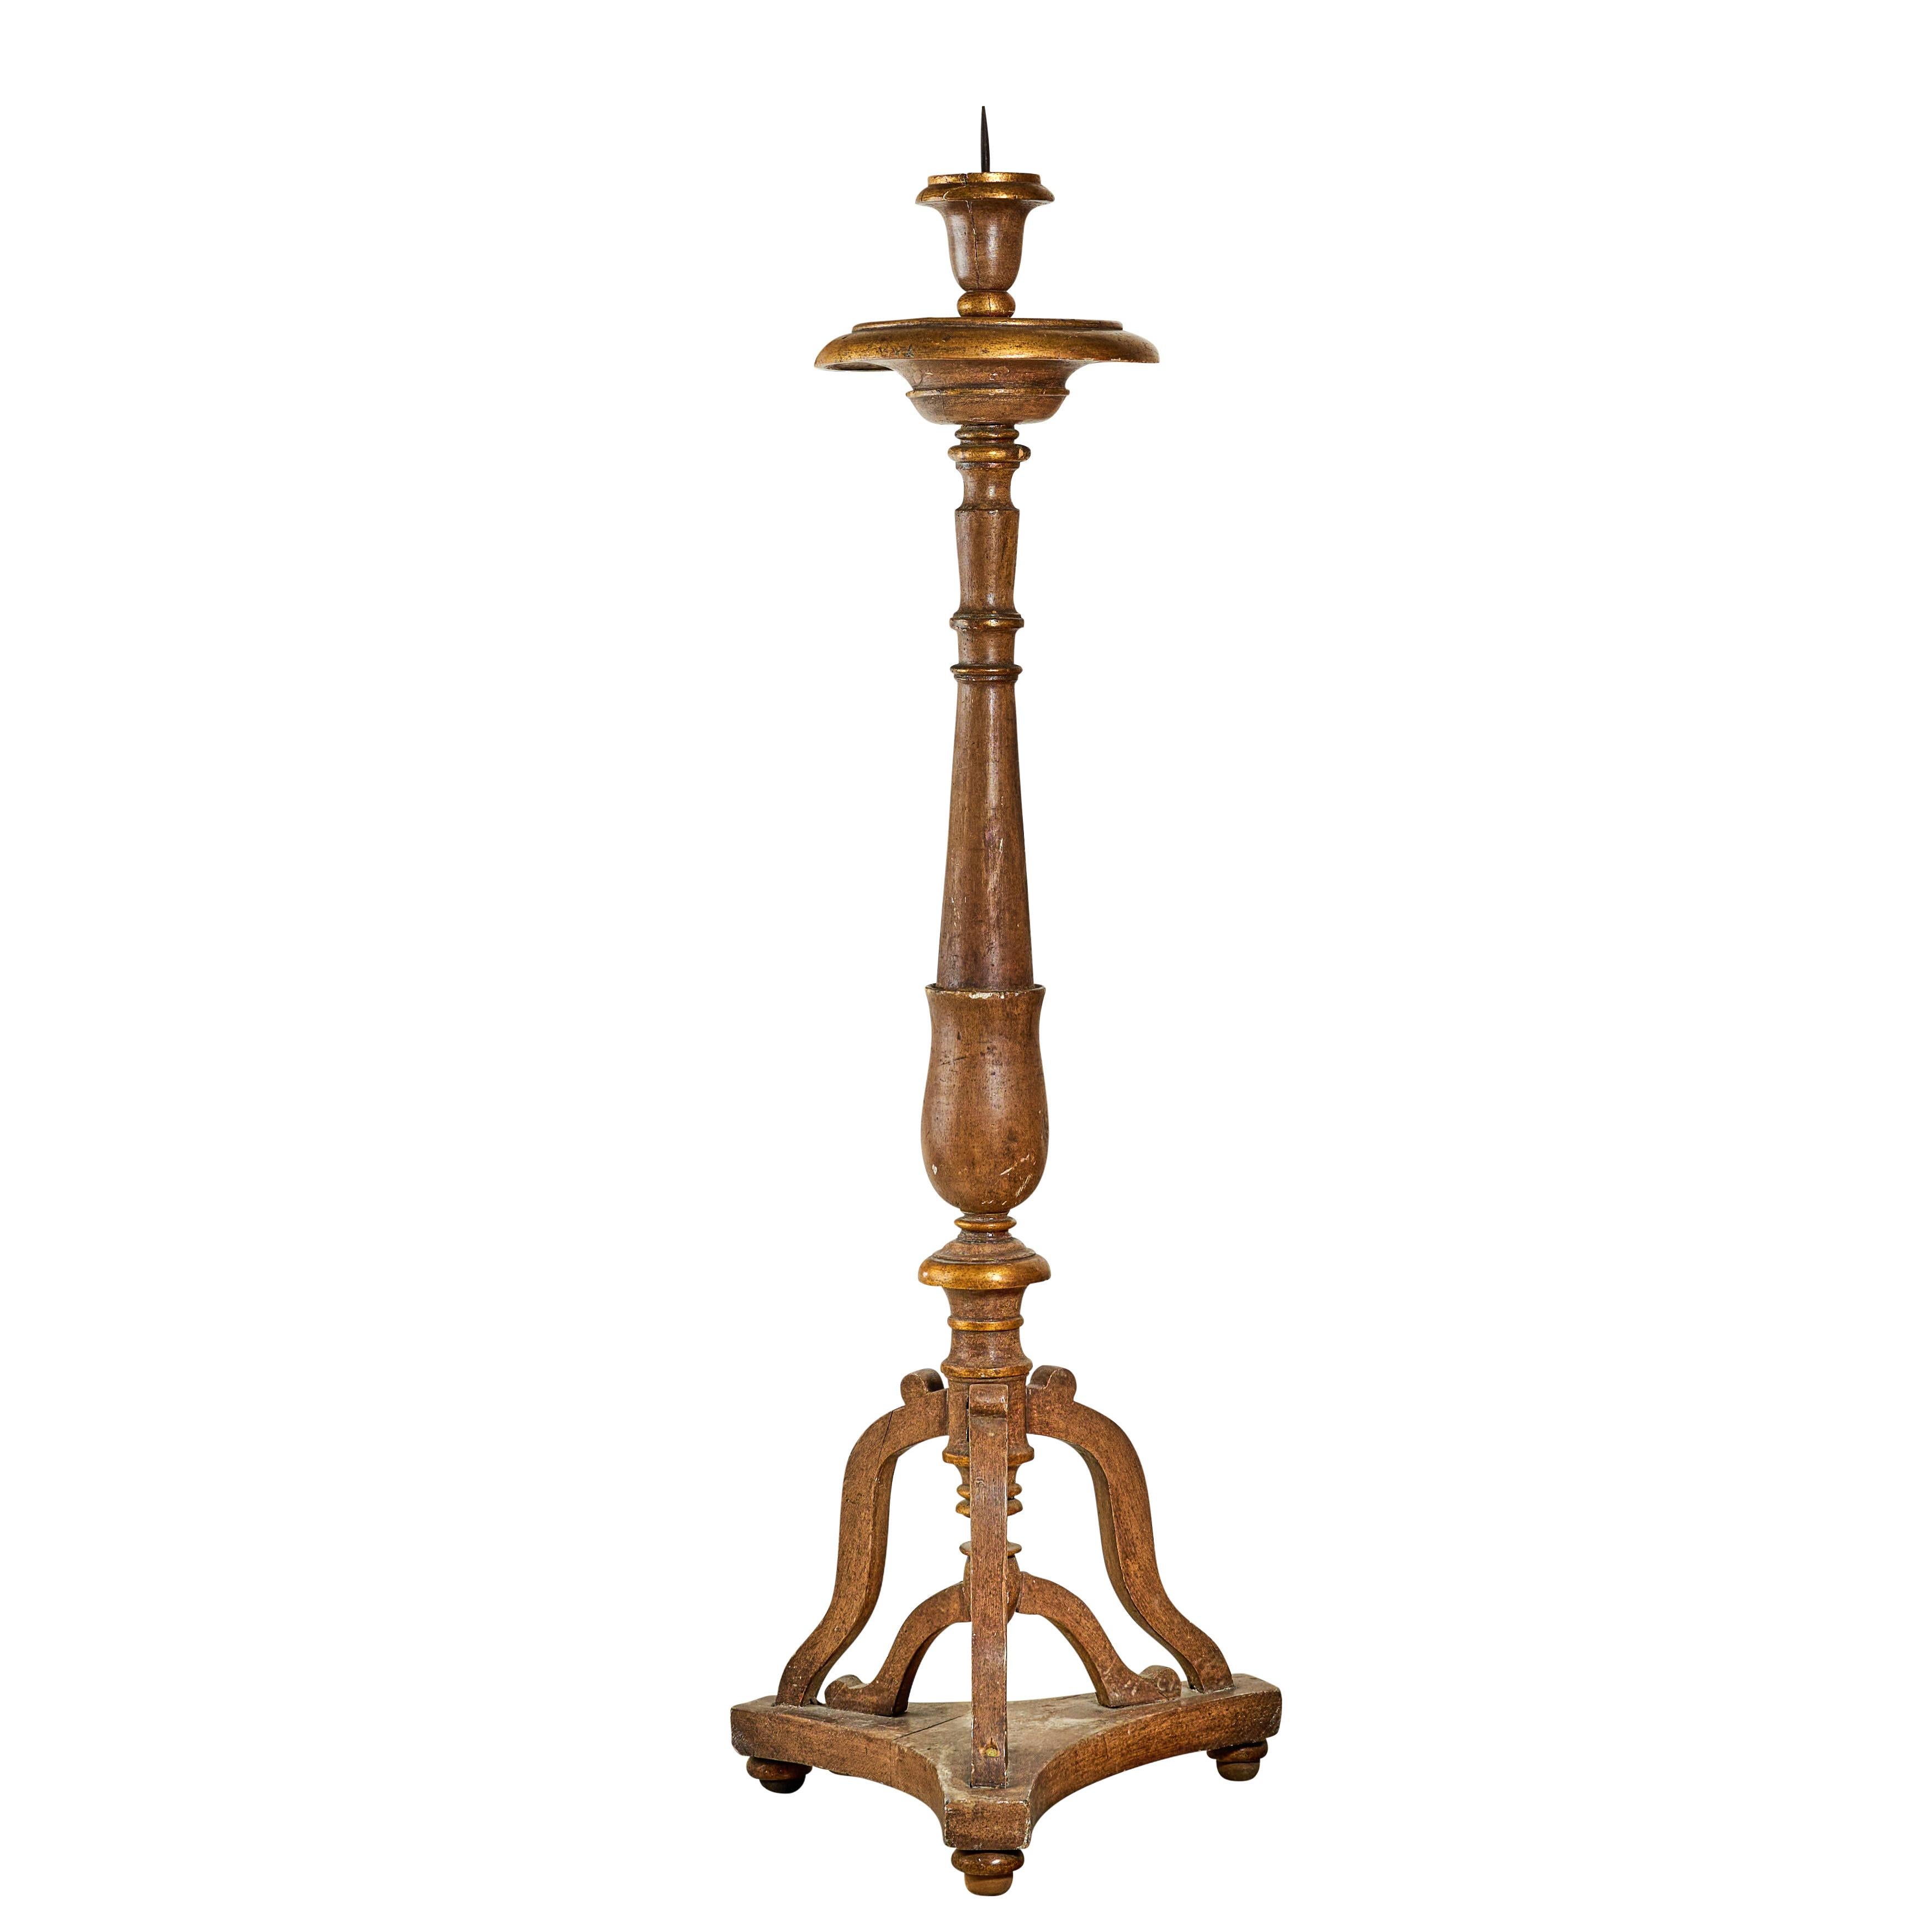 Extra large and cool candle stick with great patina.